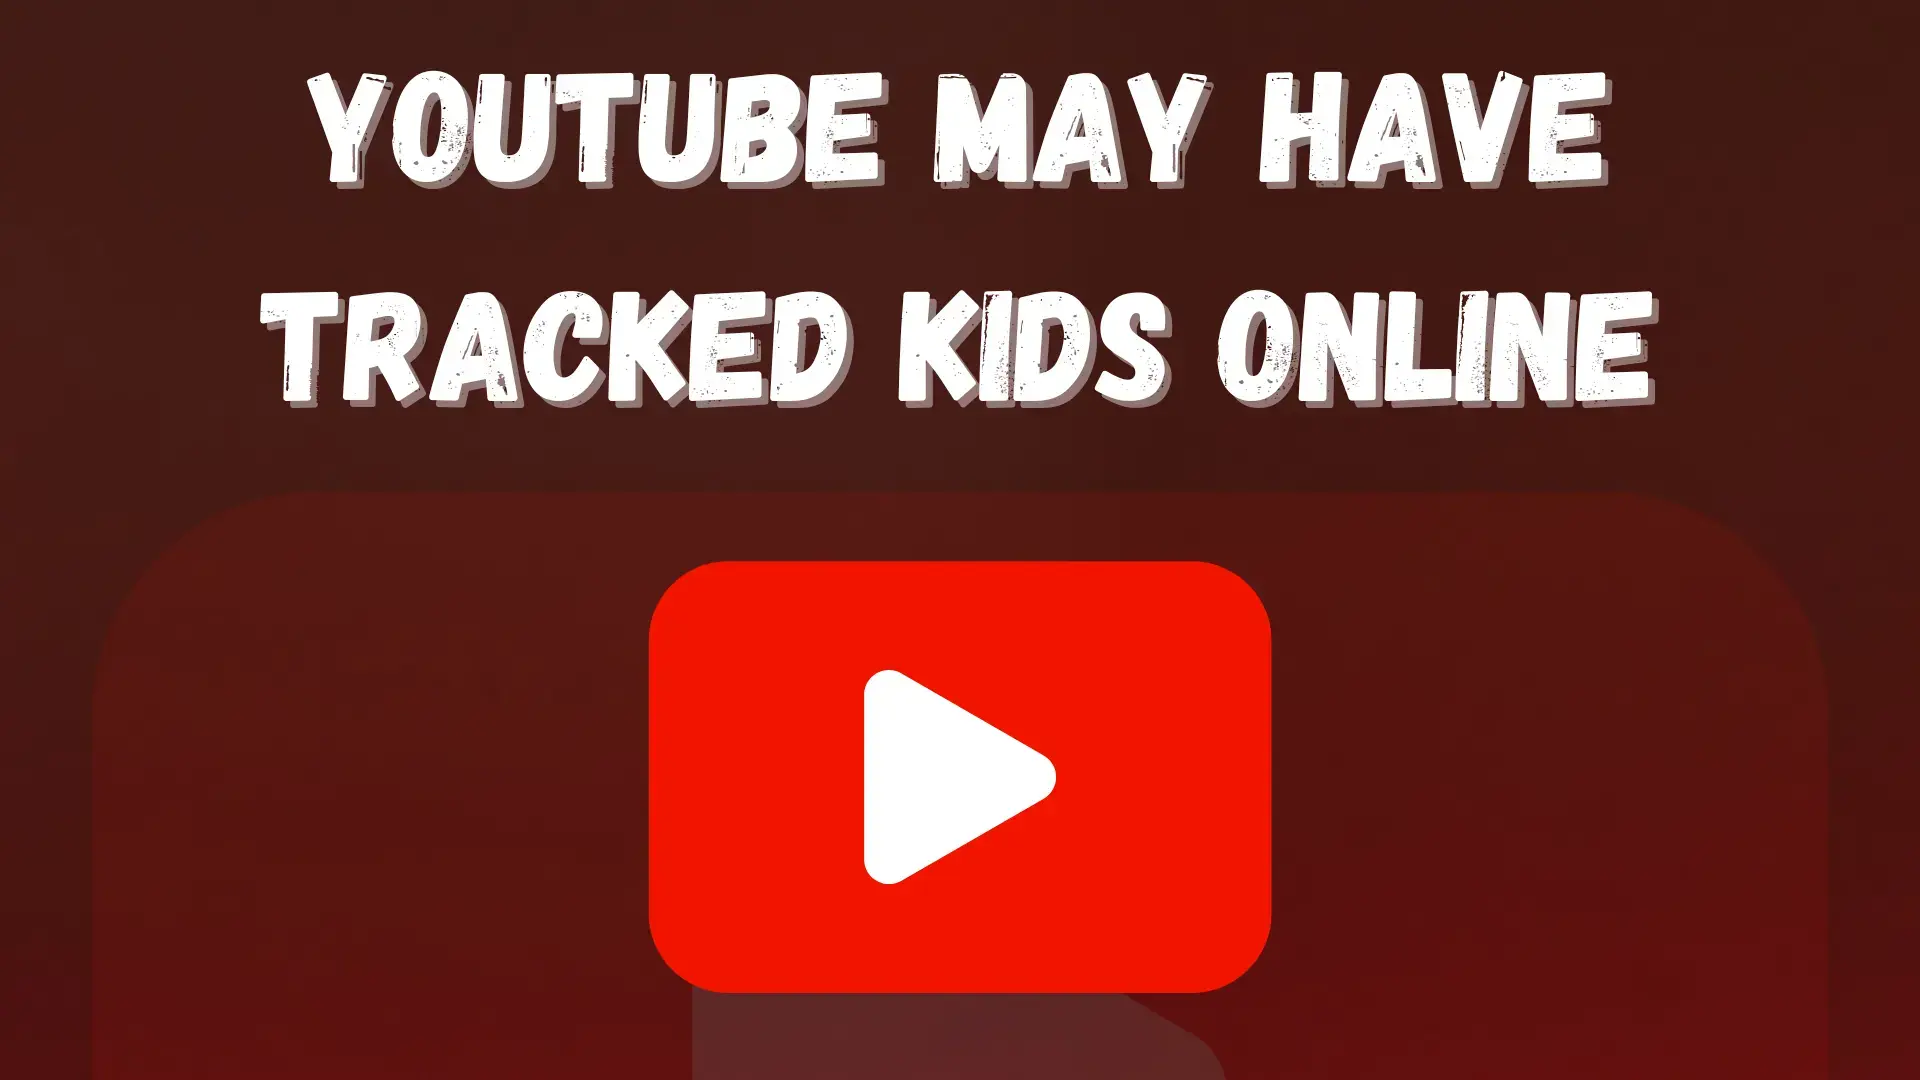 YouTube May Have Tracked Kids Online